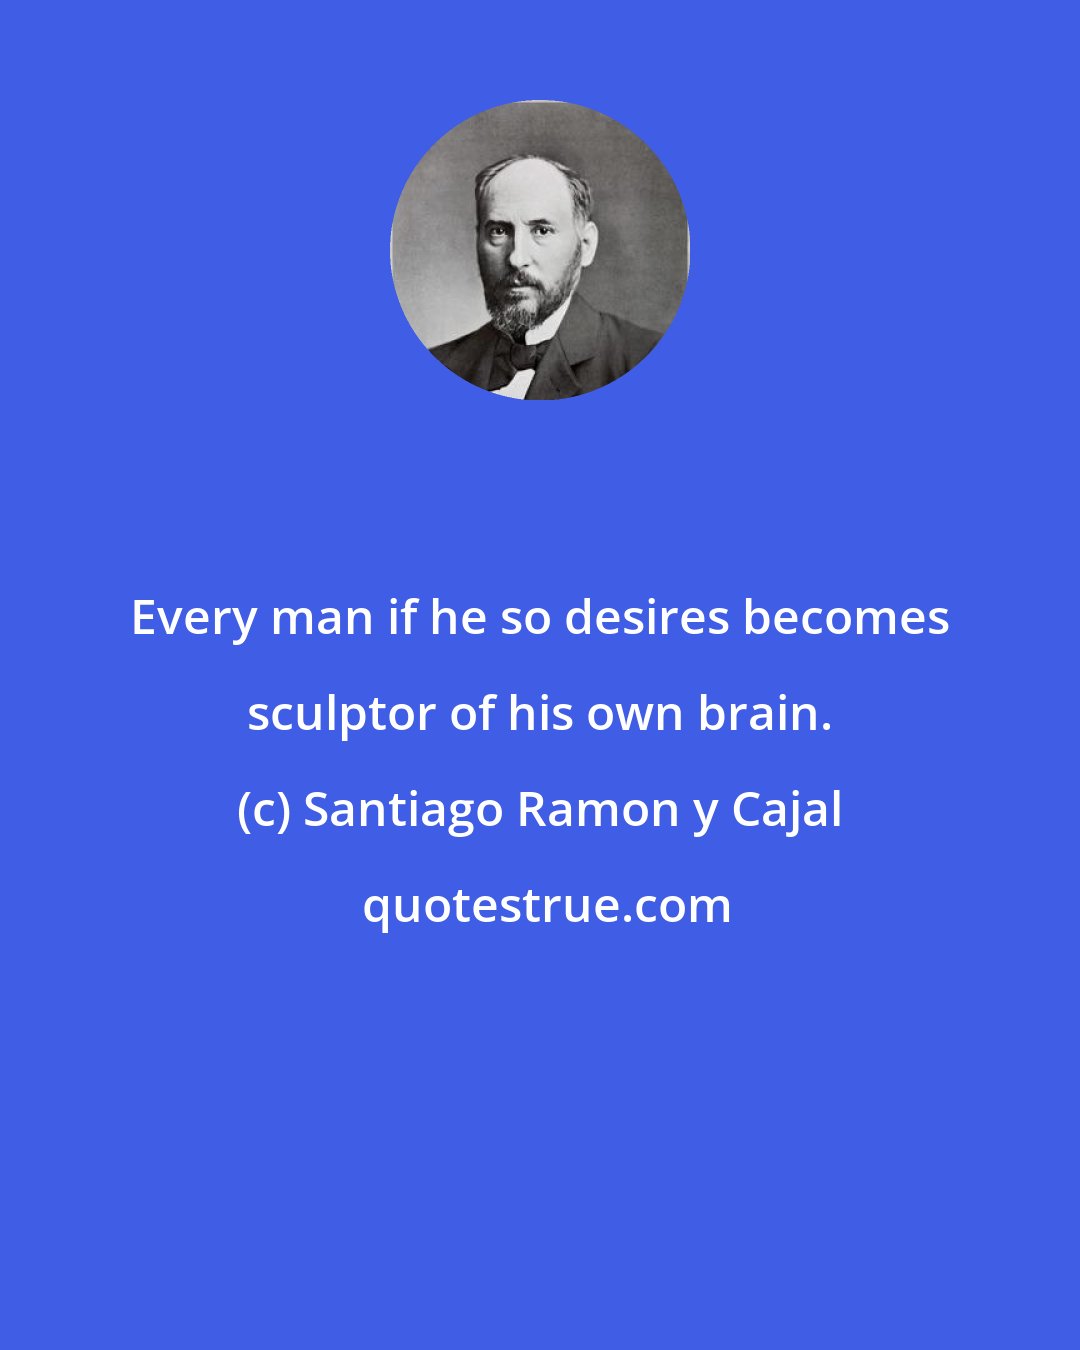 Santiago Ramon y Cajal: Every man if he so desires becomes sculptor of his own brain.